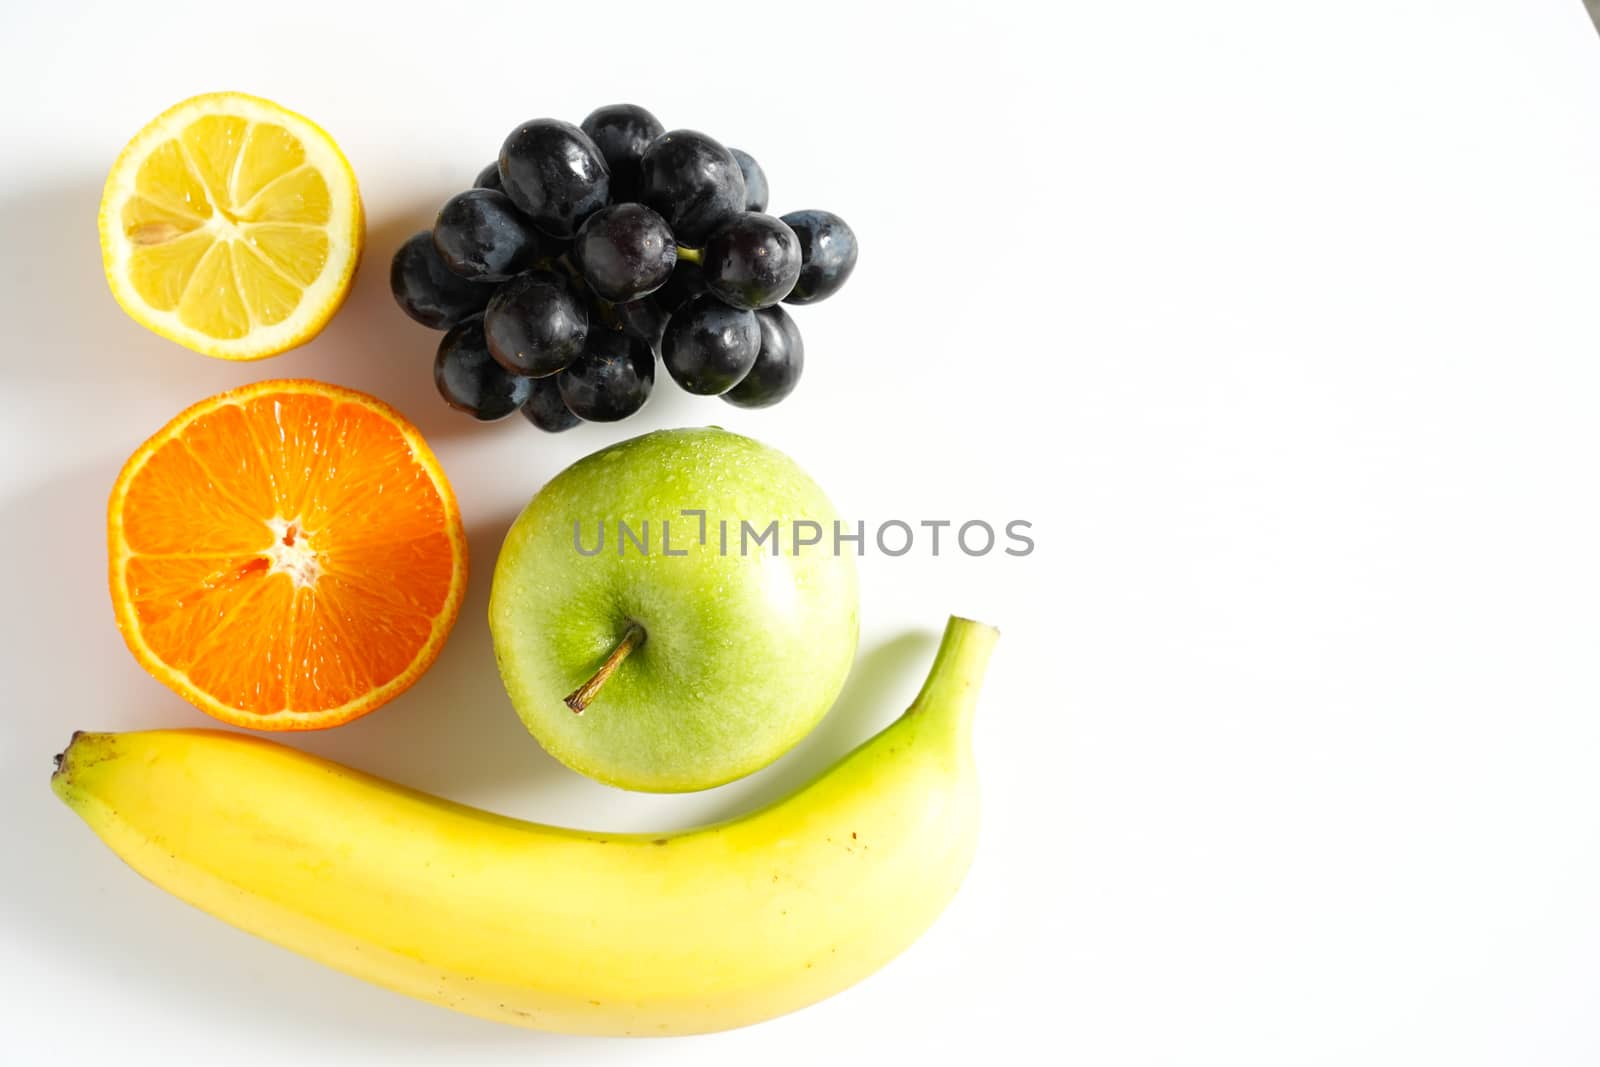 A selection of tropical fruit against a plain white background